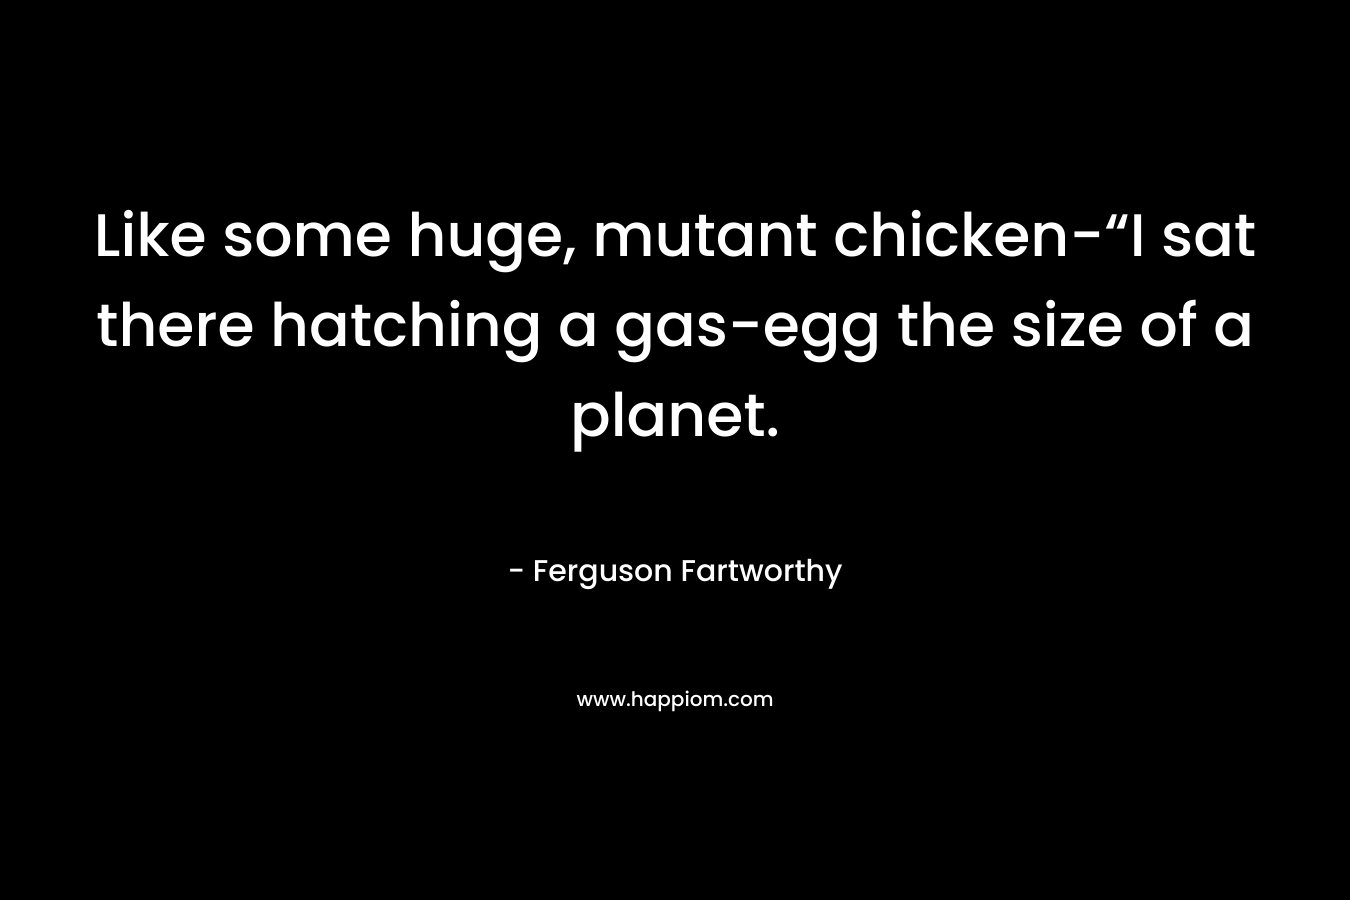 Like some huge, mutant chicken-“I sat there hatching a gas-egg the size of a planet.